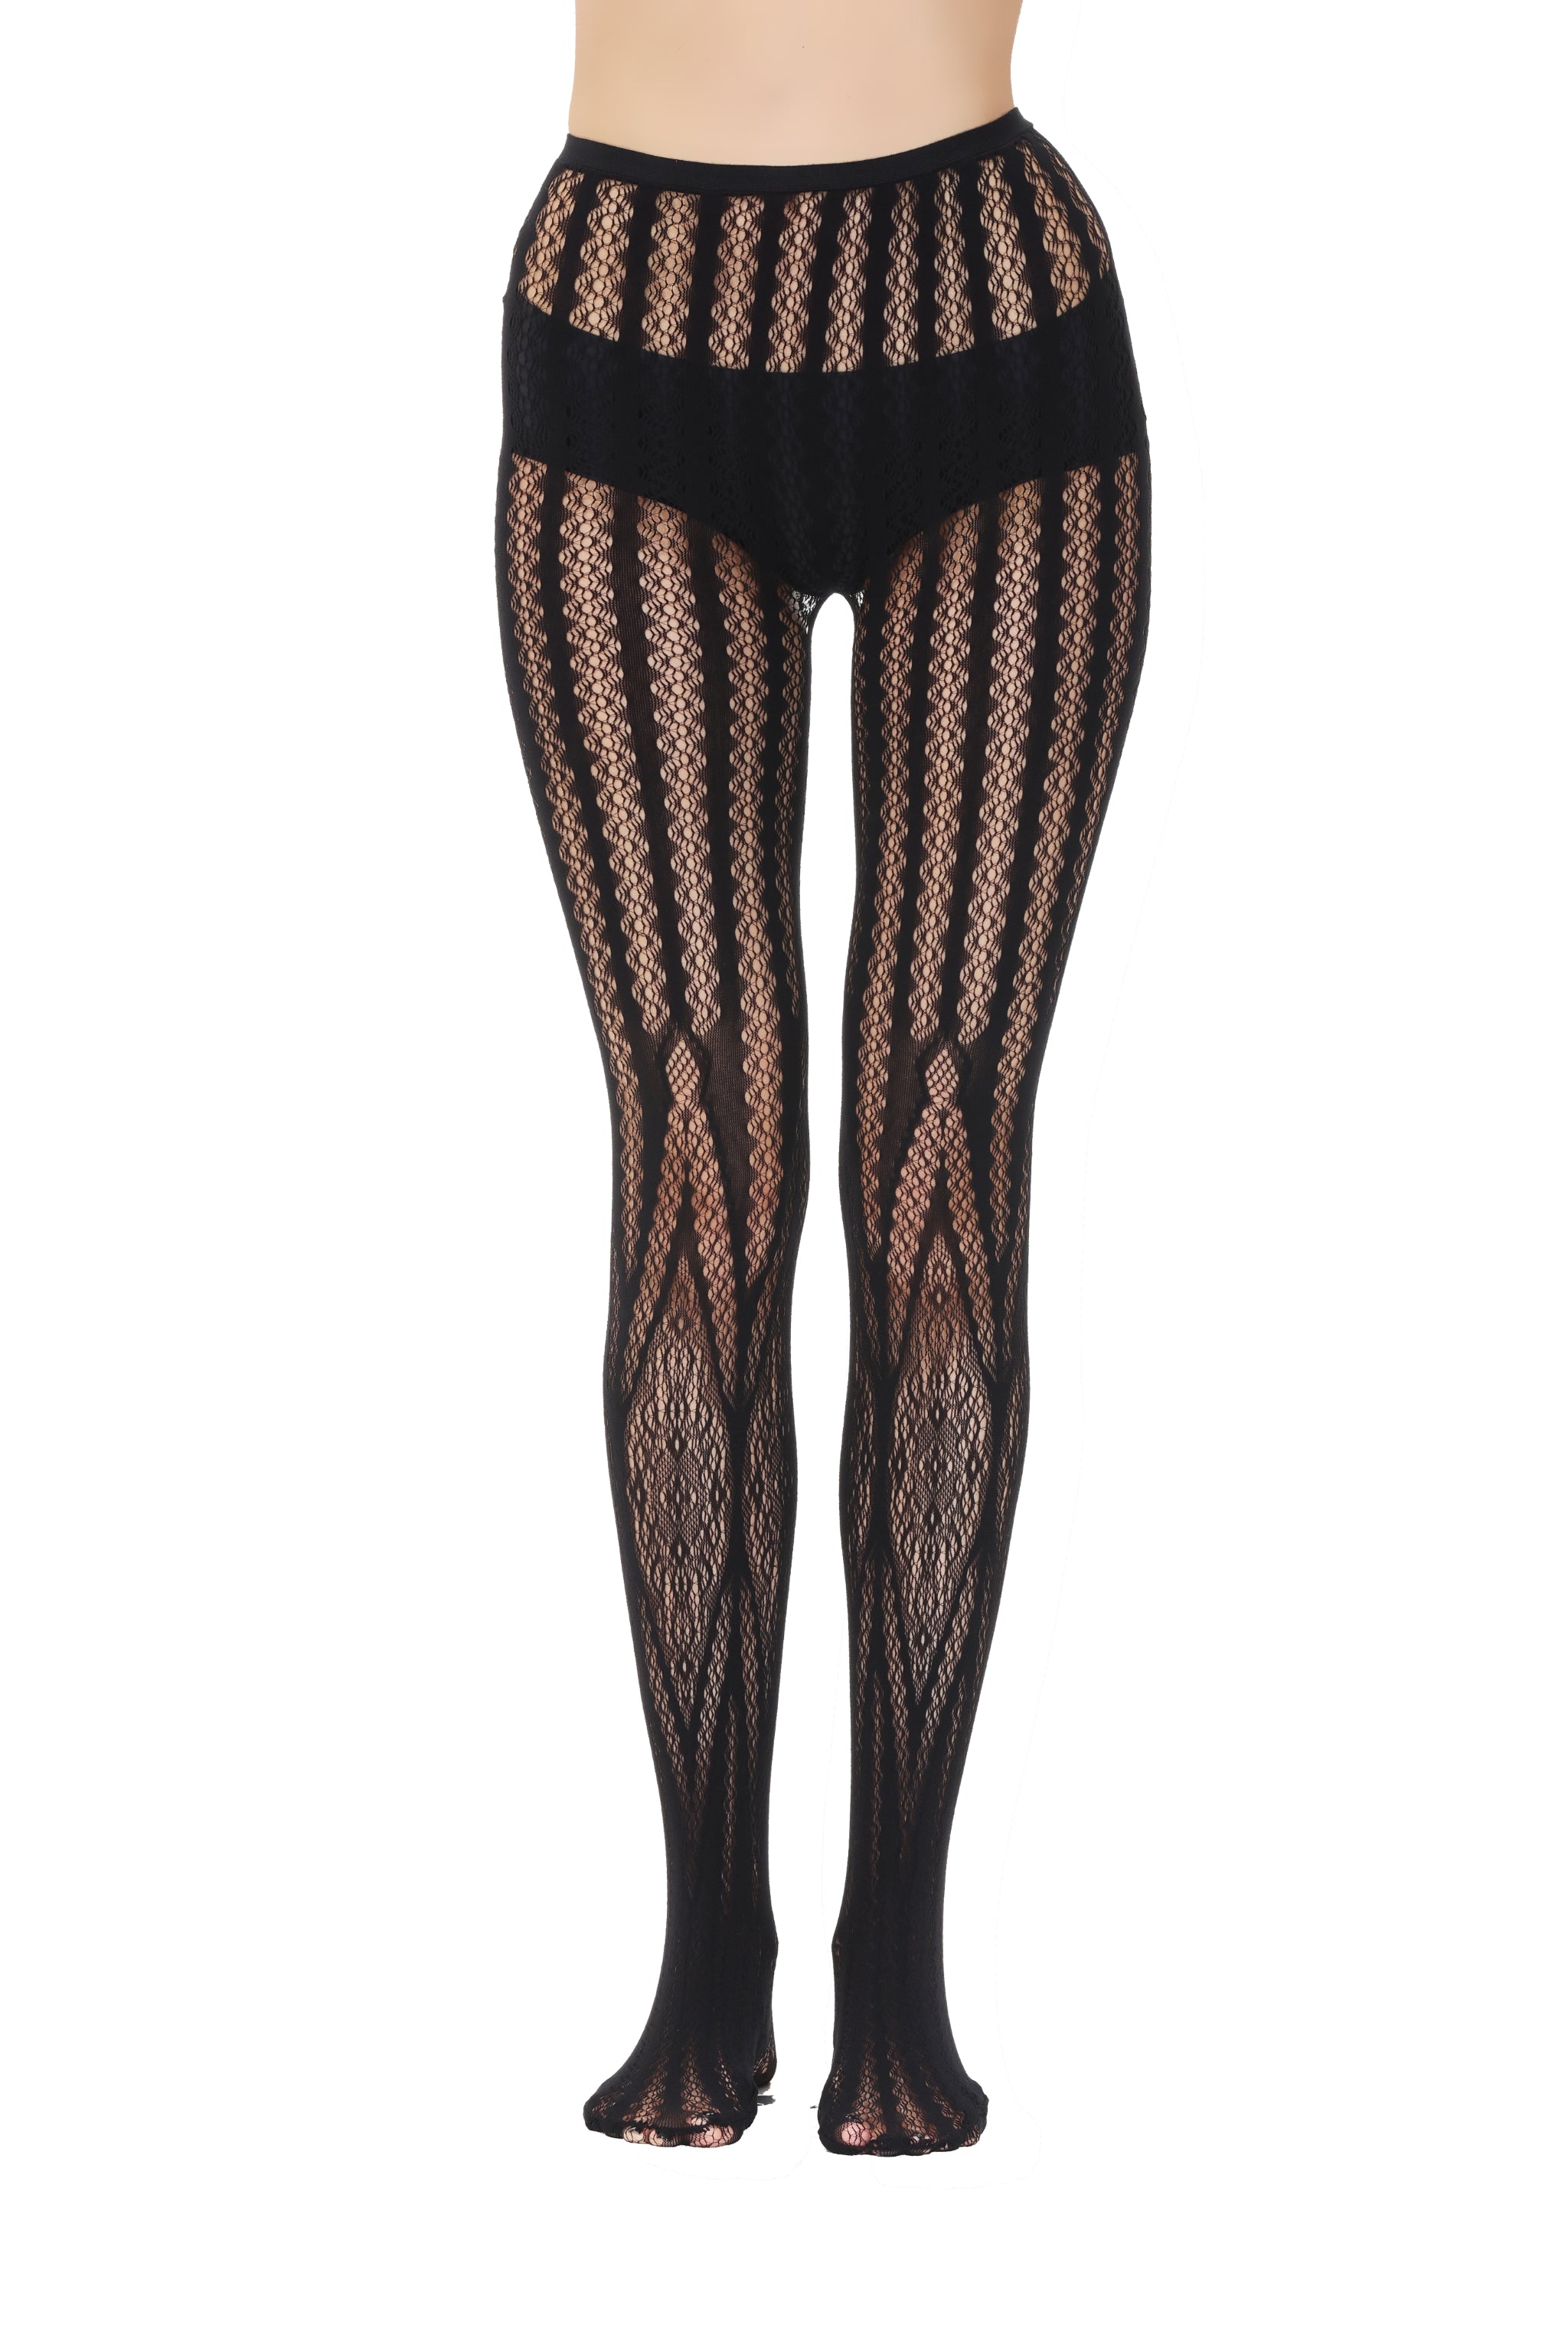 Fishnet Tights 110961-2 Front